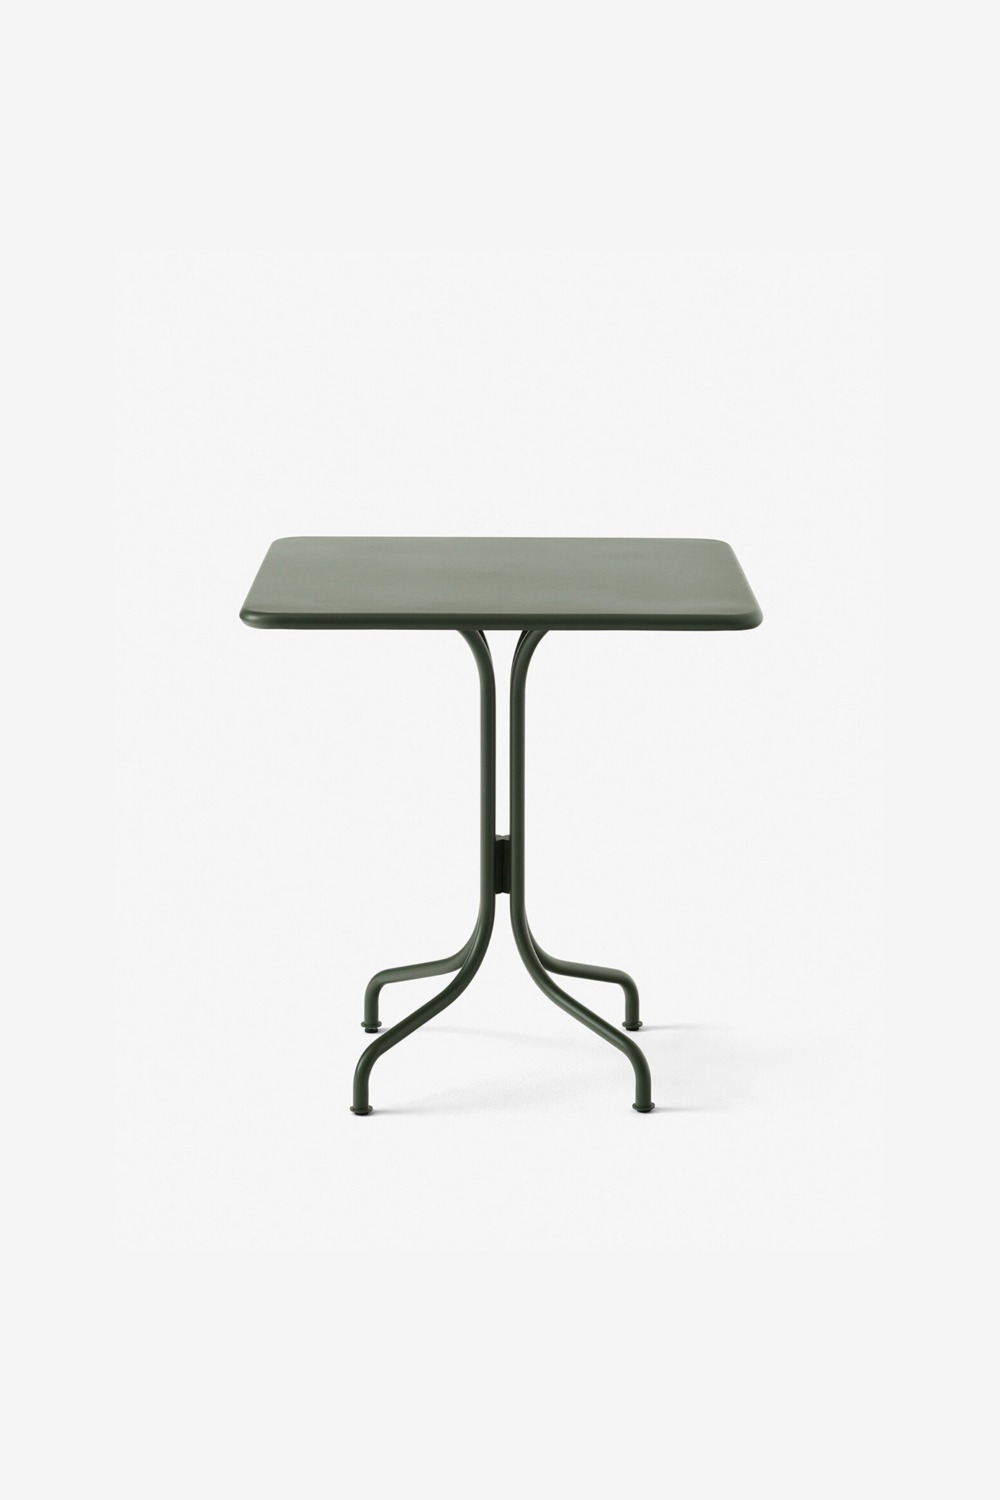 [&amp;Tradition] Thorvald Cafe Table /SC97 (Bronze Green)